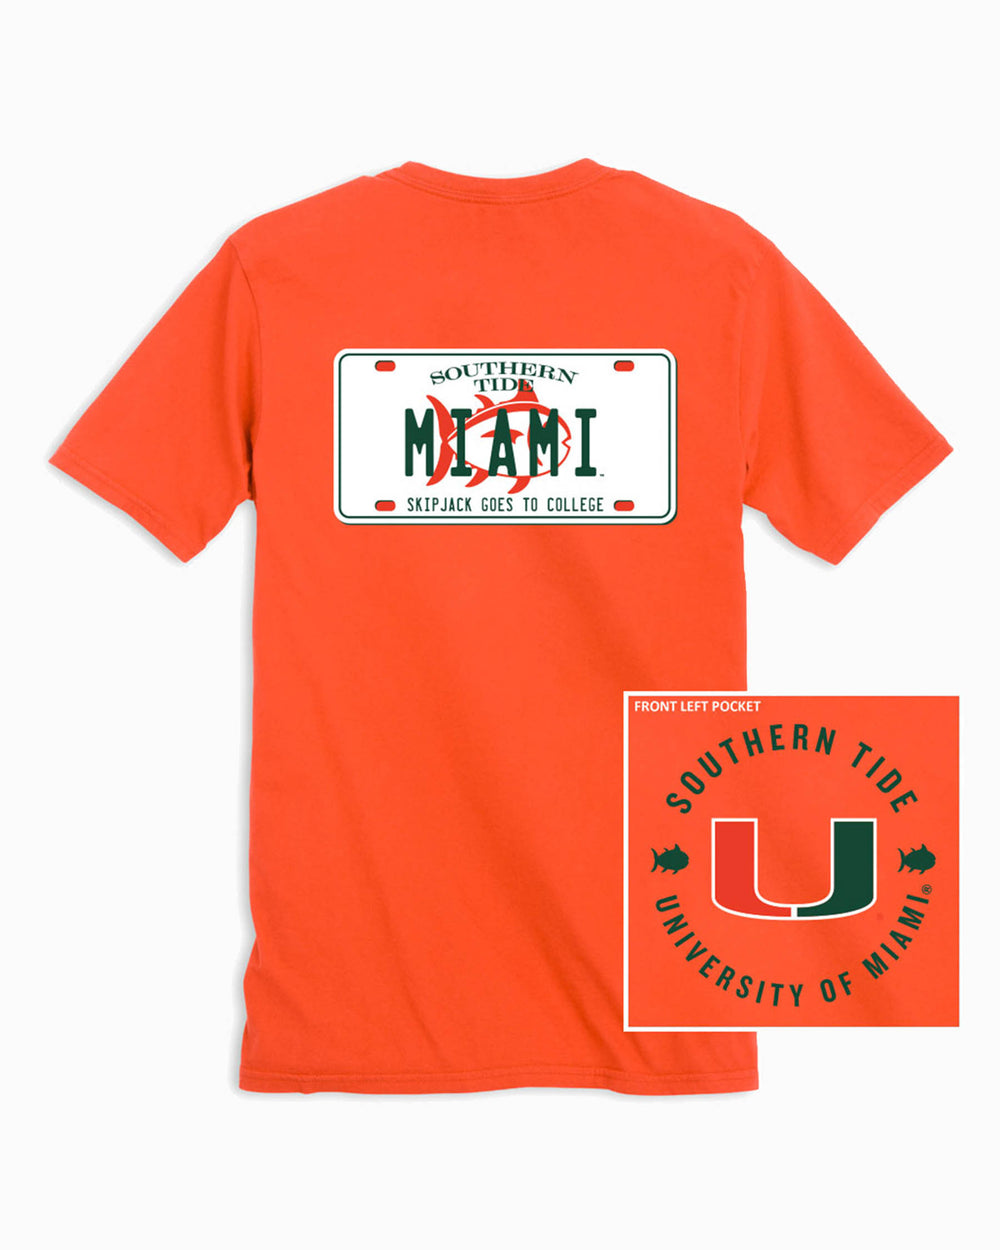 The front and back of the Men's Miami Hurricanes License Plate T-Shirt by Southern Tide - Endzone Orange